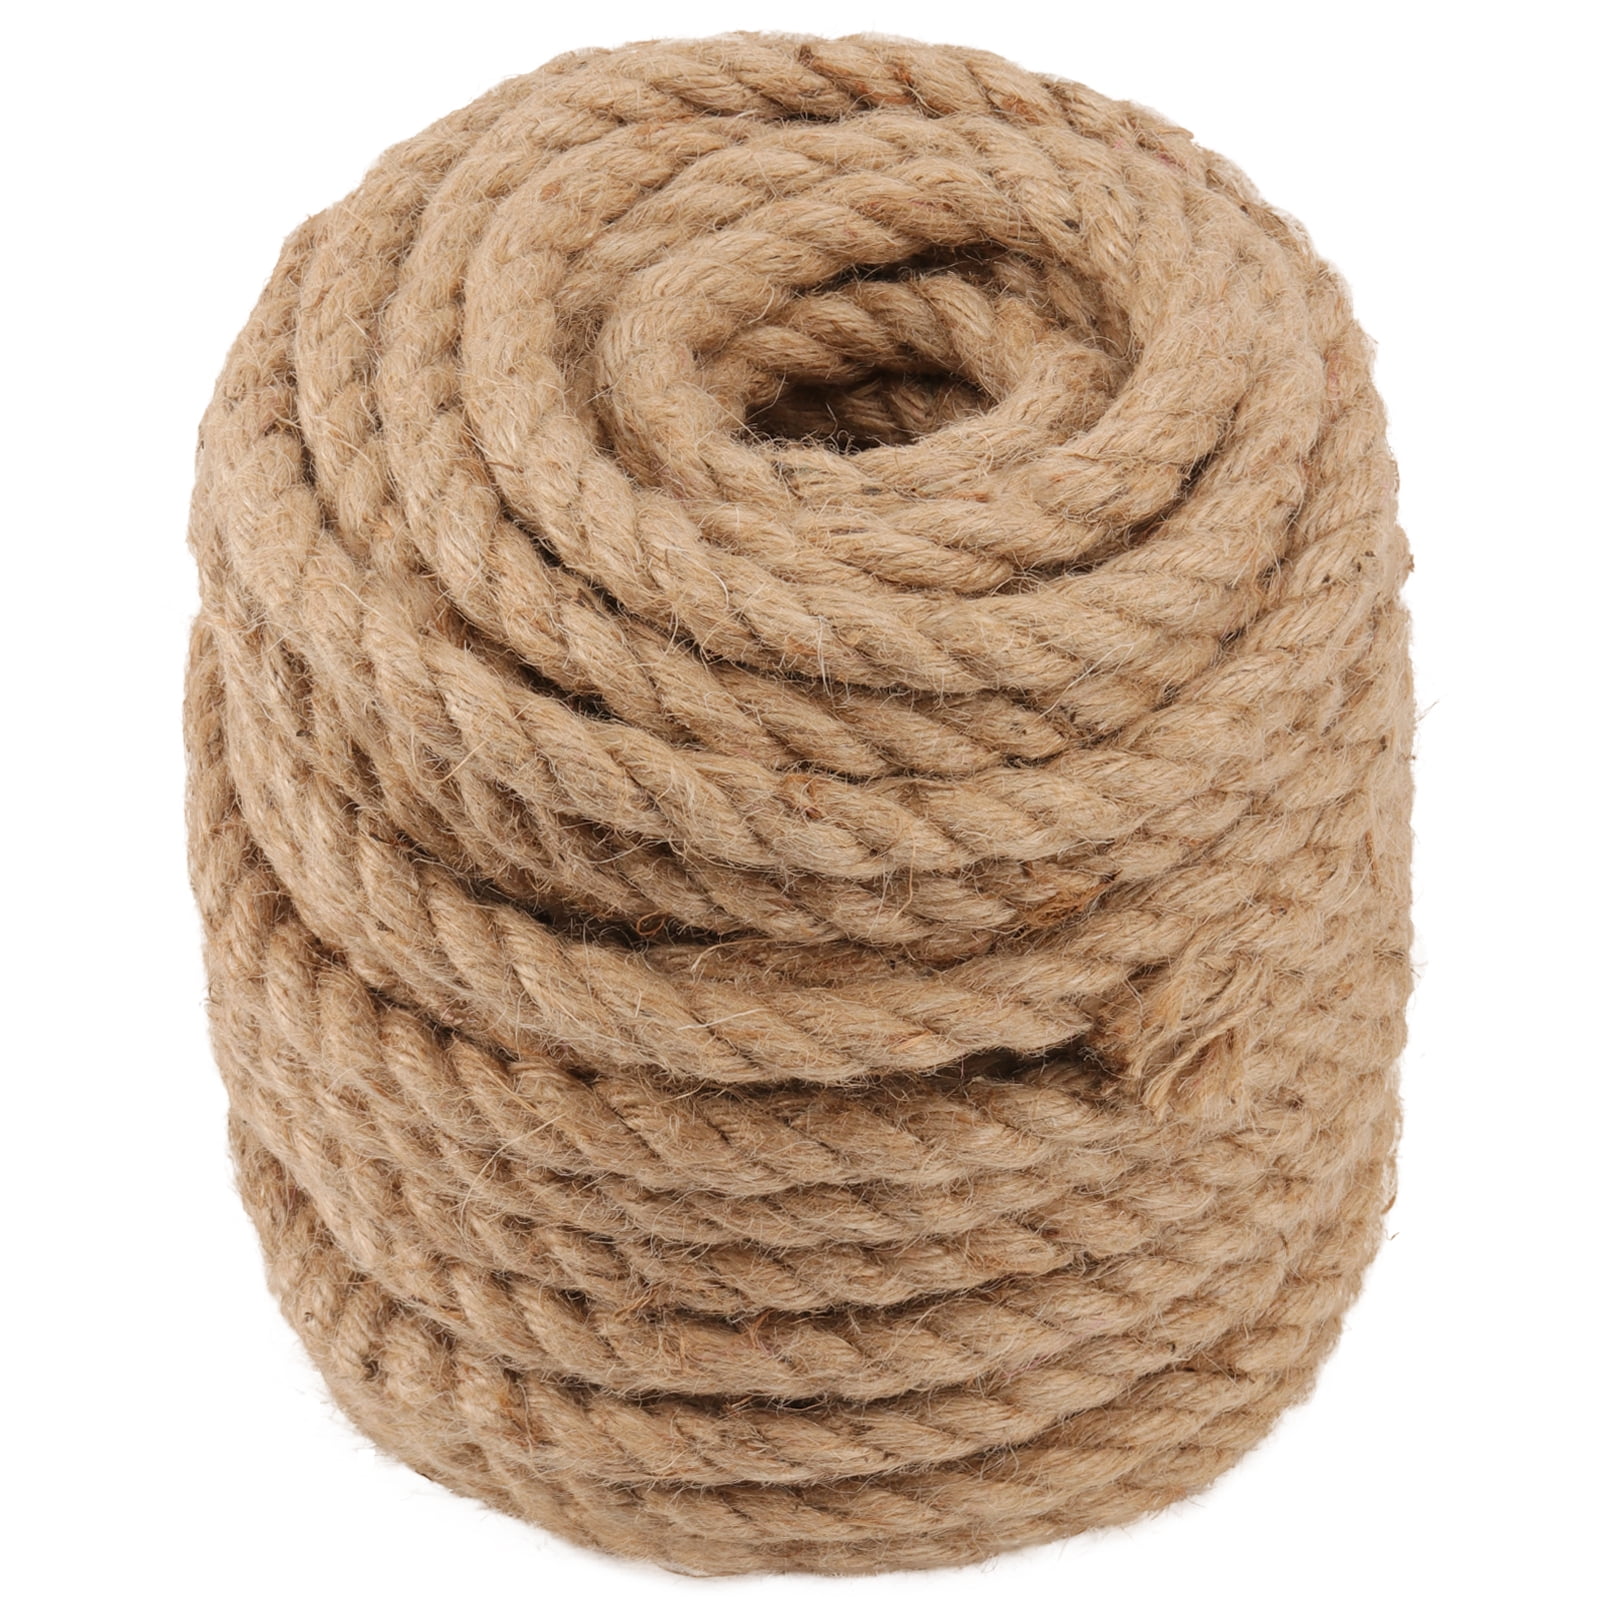 26mm 100% Natural Jute Rope 3 Strand Twisted Cord Decking Garden Boating Camping 